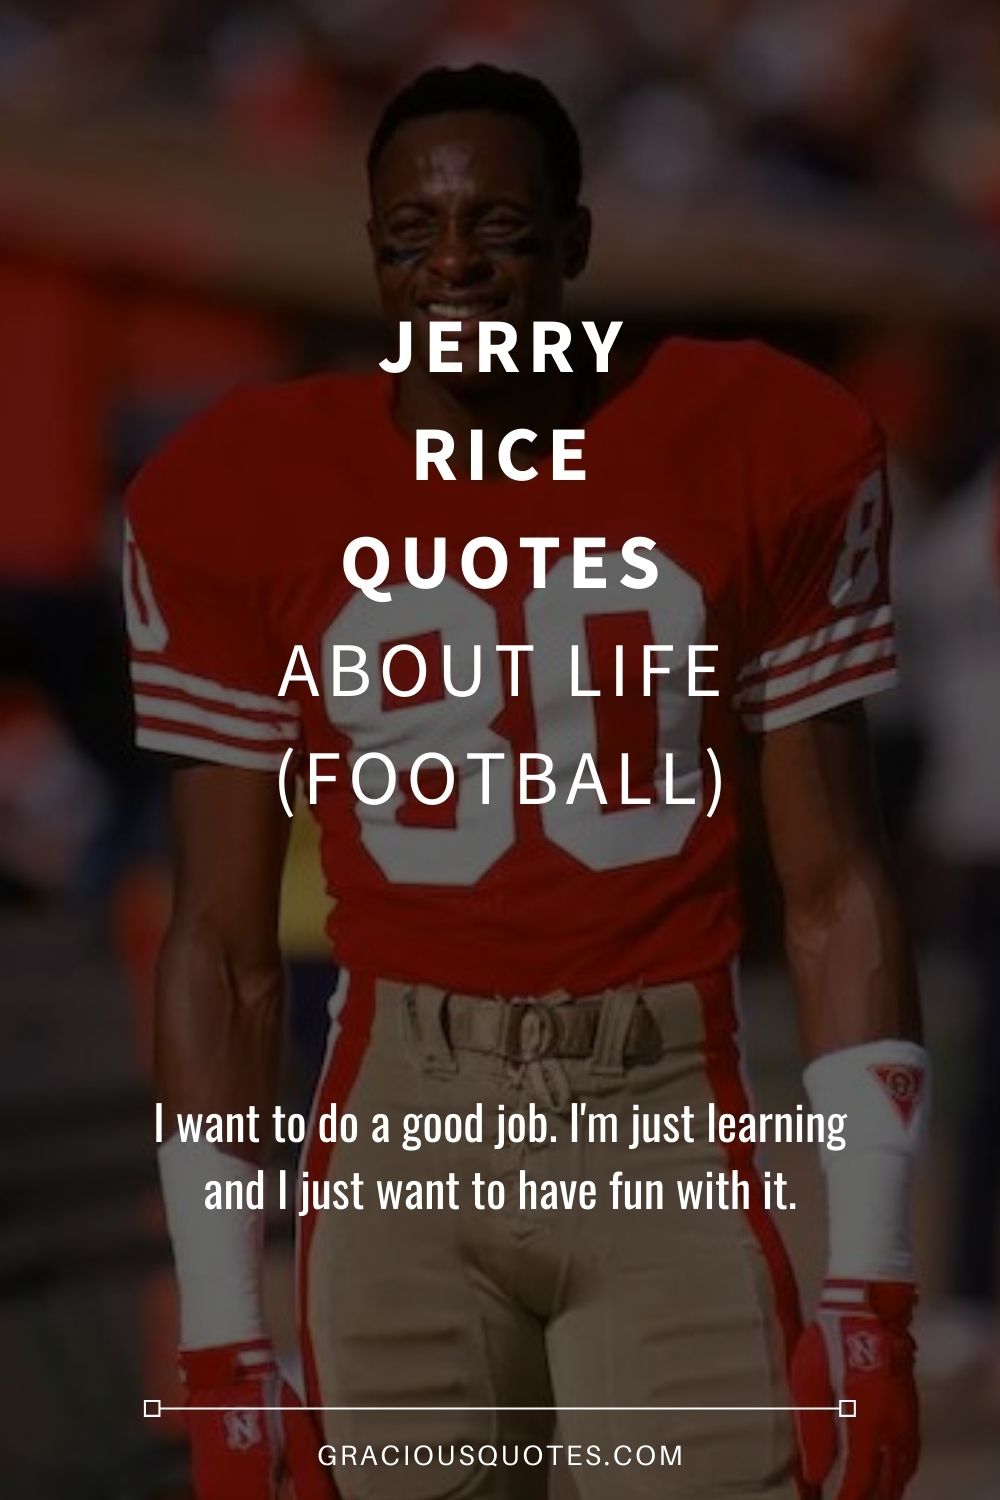 Jerry Rice Quotes About Life (FOOTBALL) - Gracious Quotes